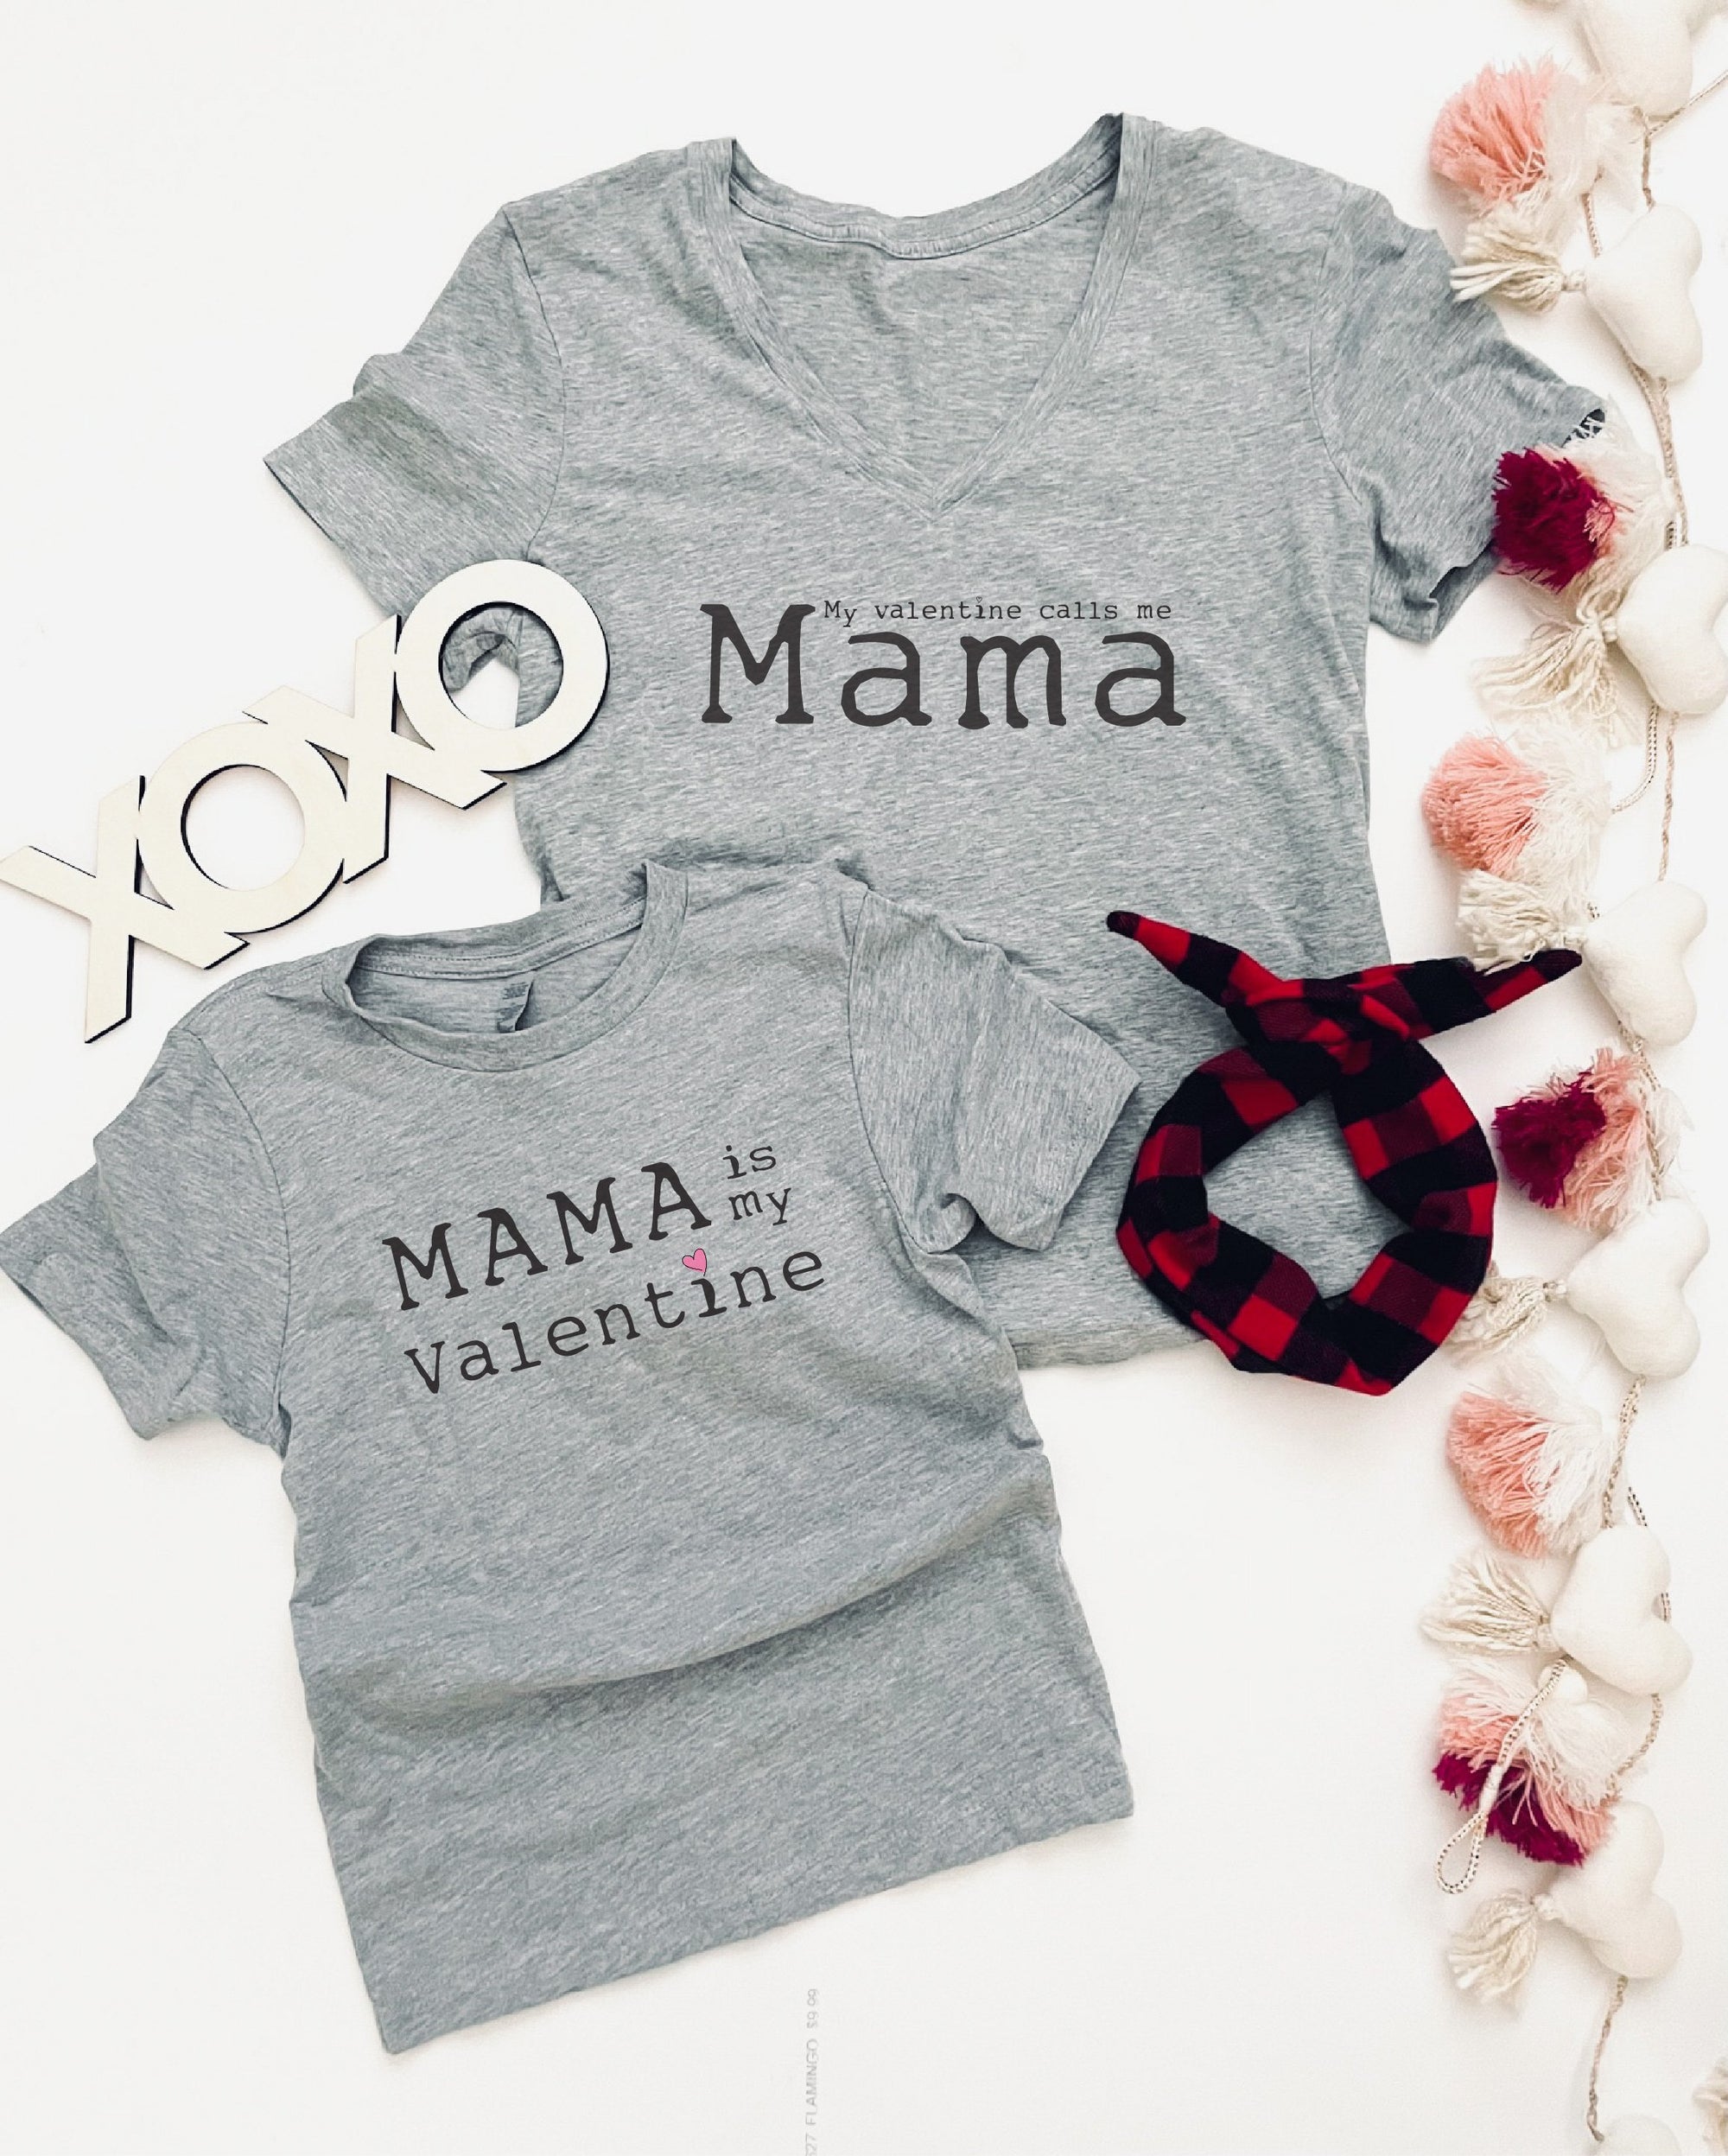 My valentine calls me mama v-neck tee Short sleeve valentines day tee Next Level 6240 and Bella 3005 